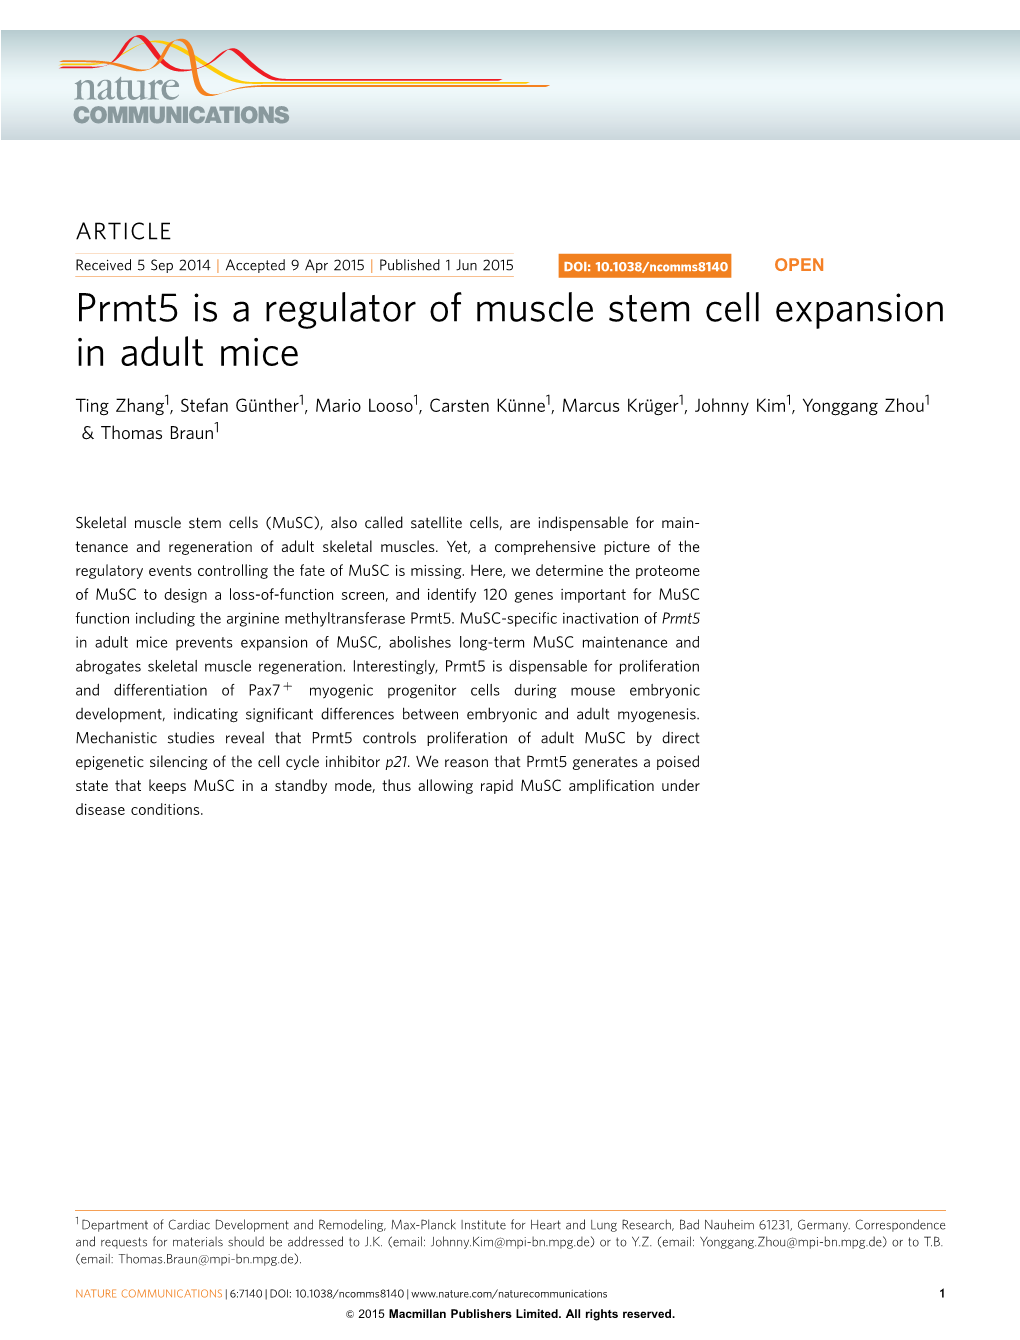 Prmt5 Is a Regulator of Muscle Stem Cell Expansion in Adult Mice